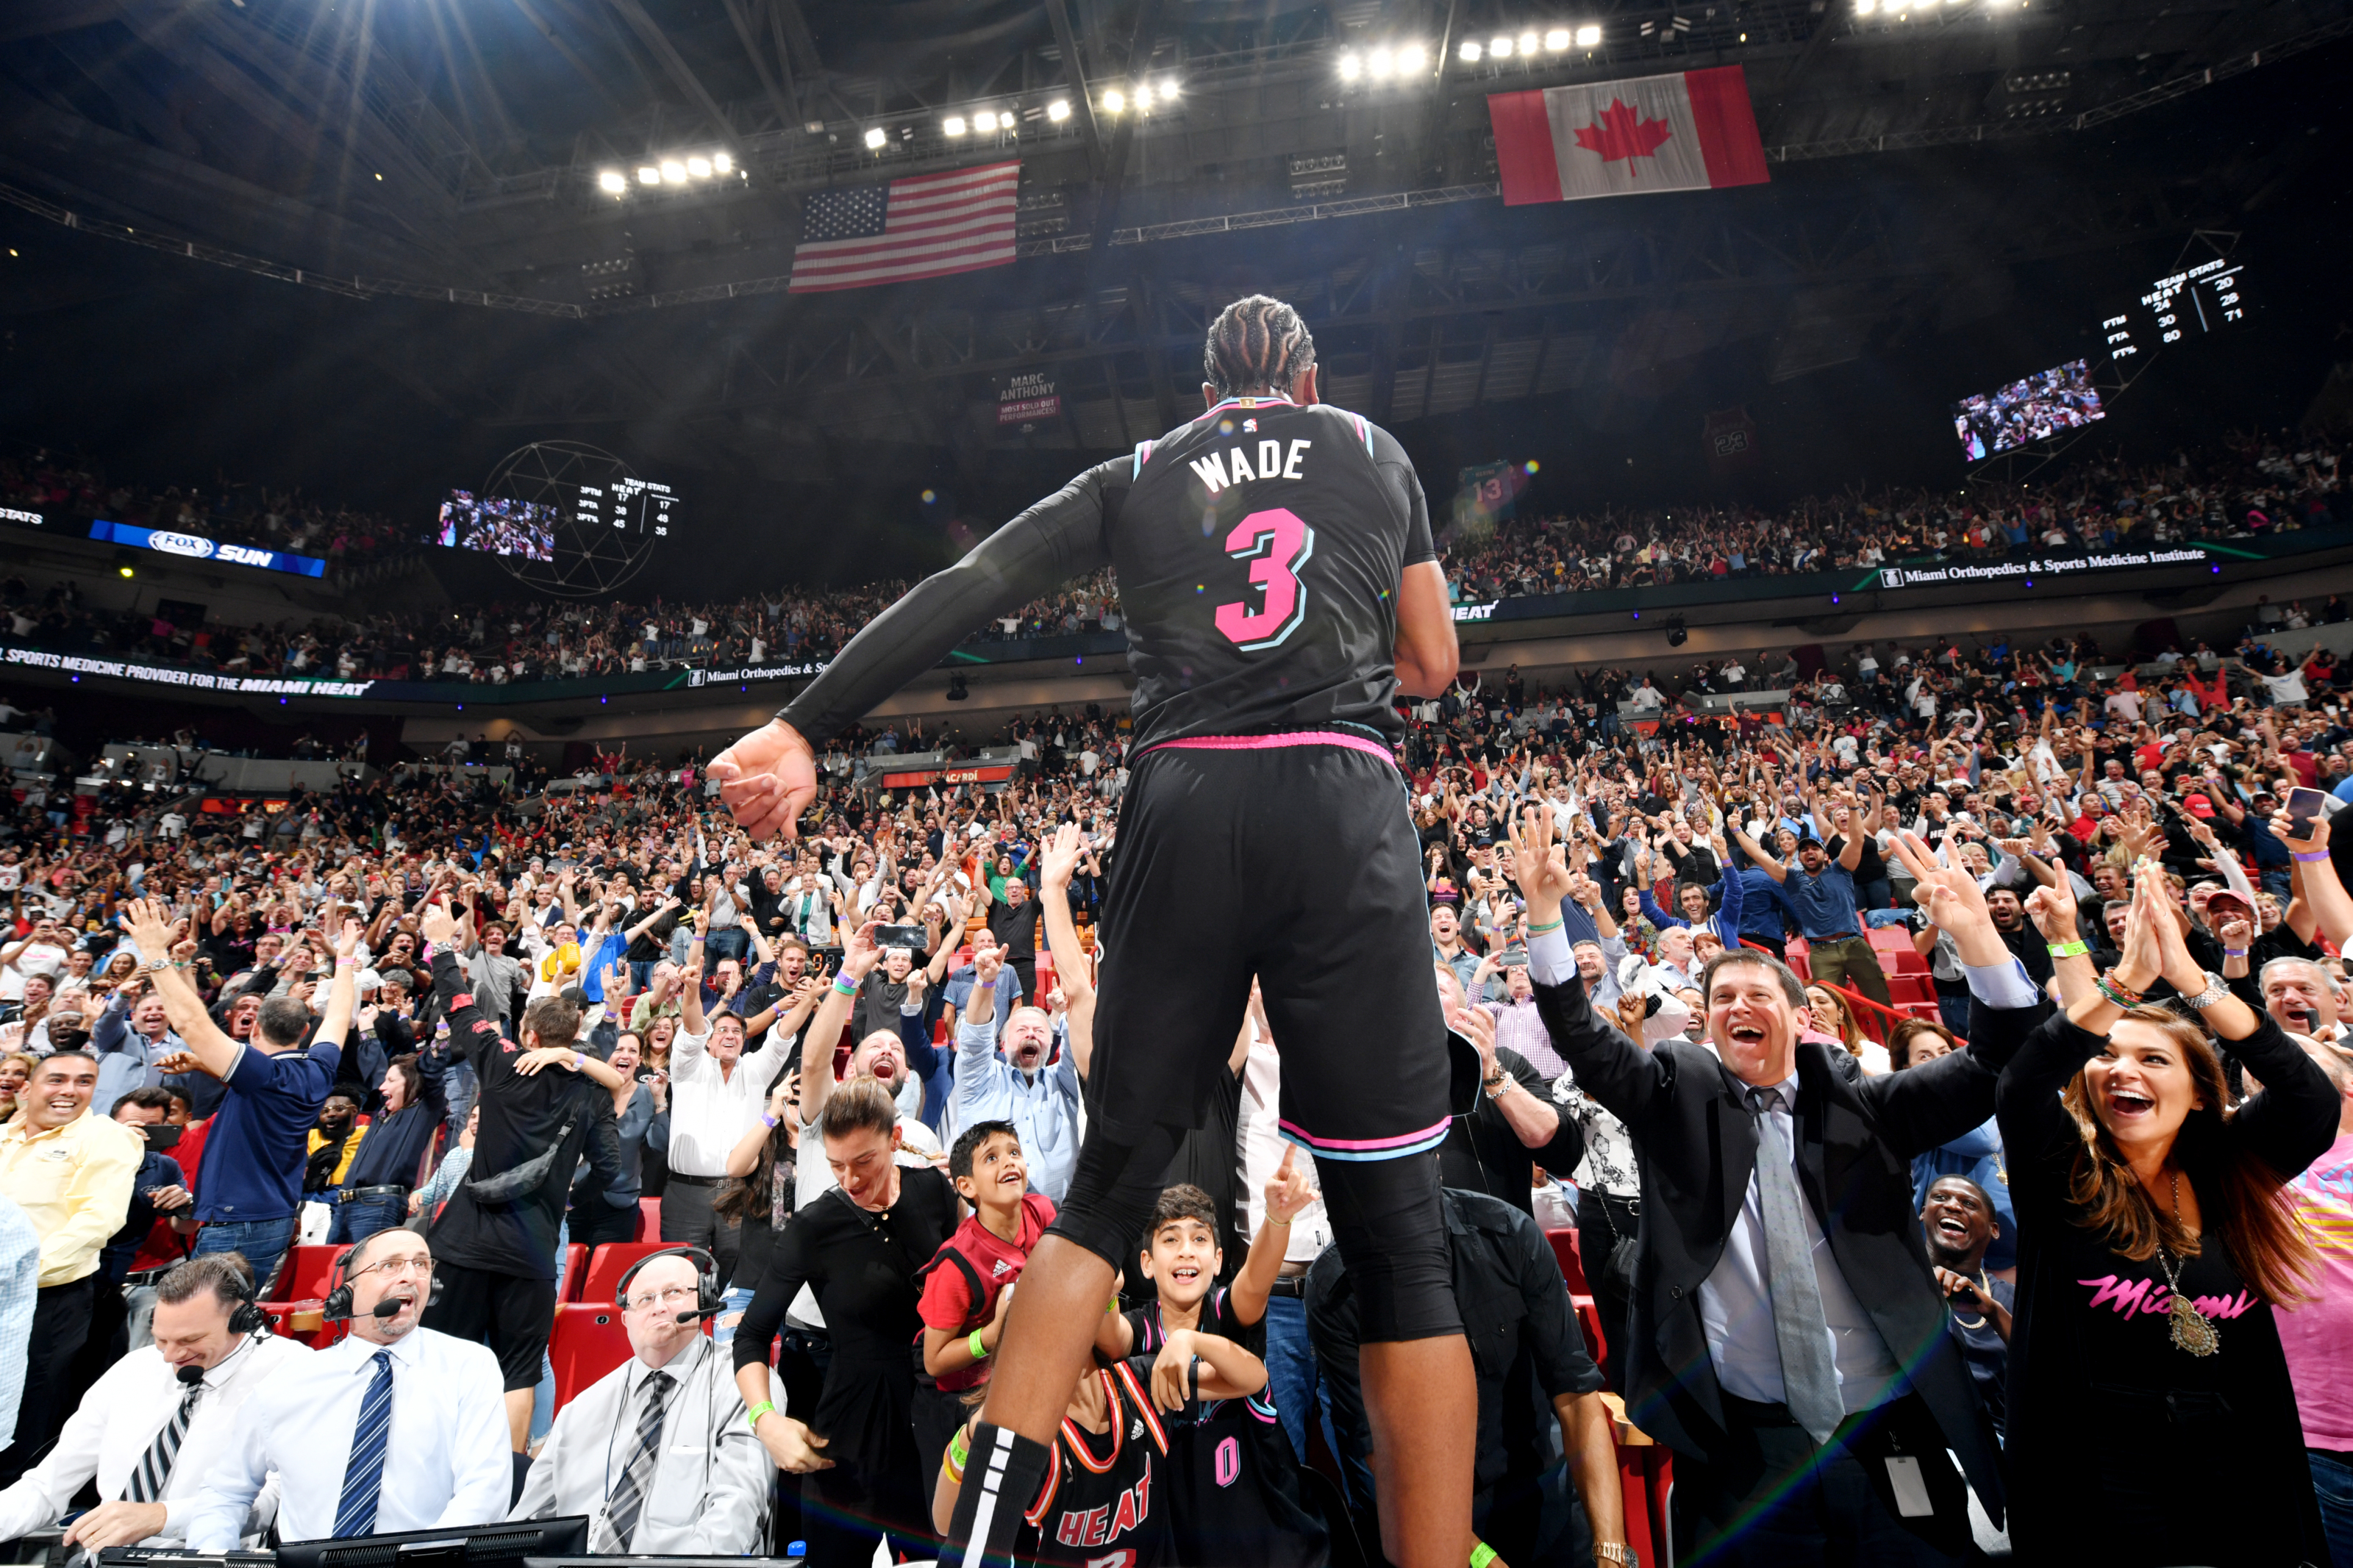 Miami Heat: Dwyane Wade's role in the midst of farewell tour